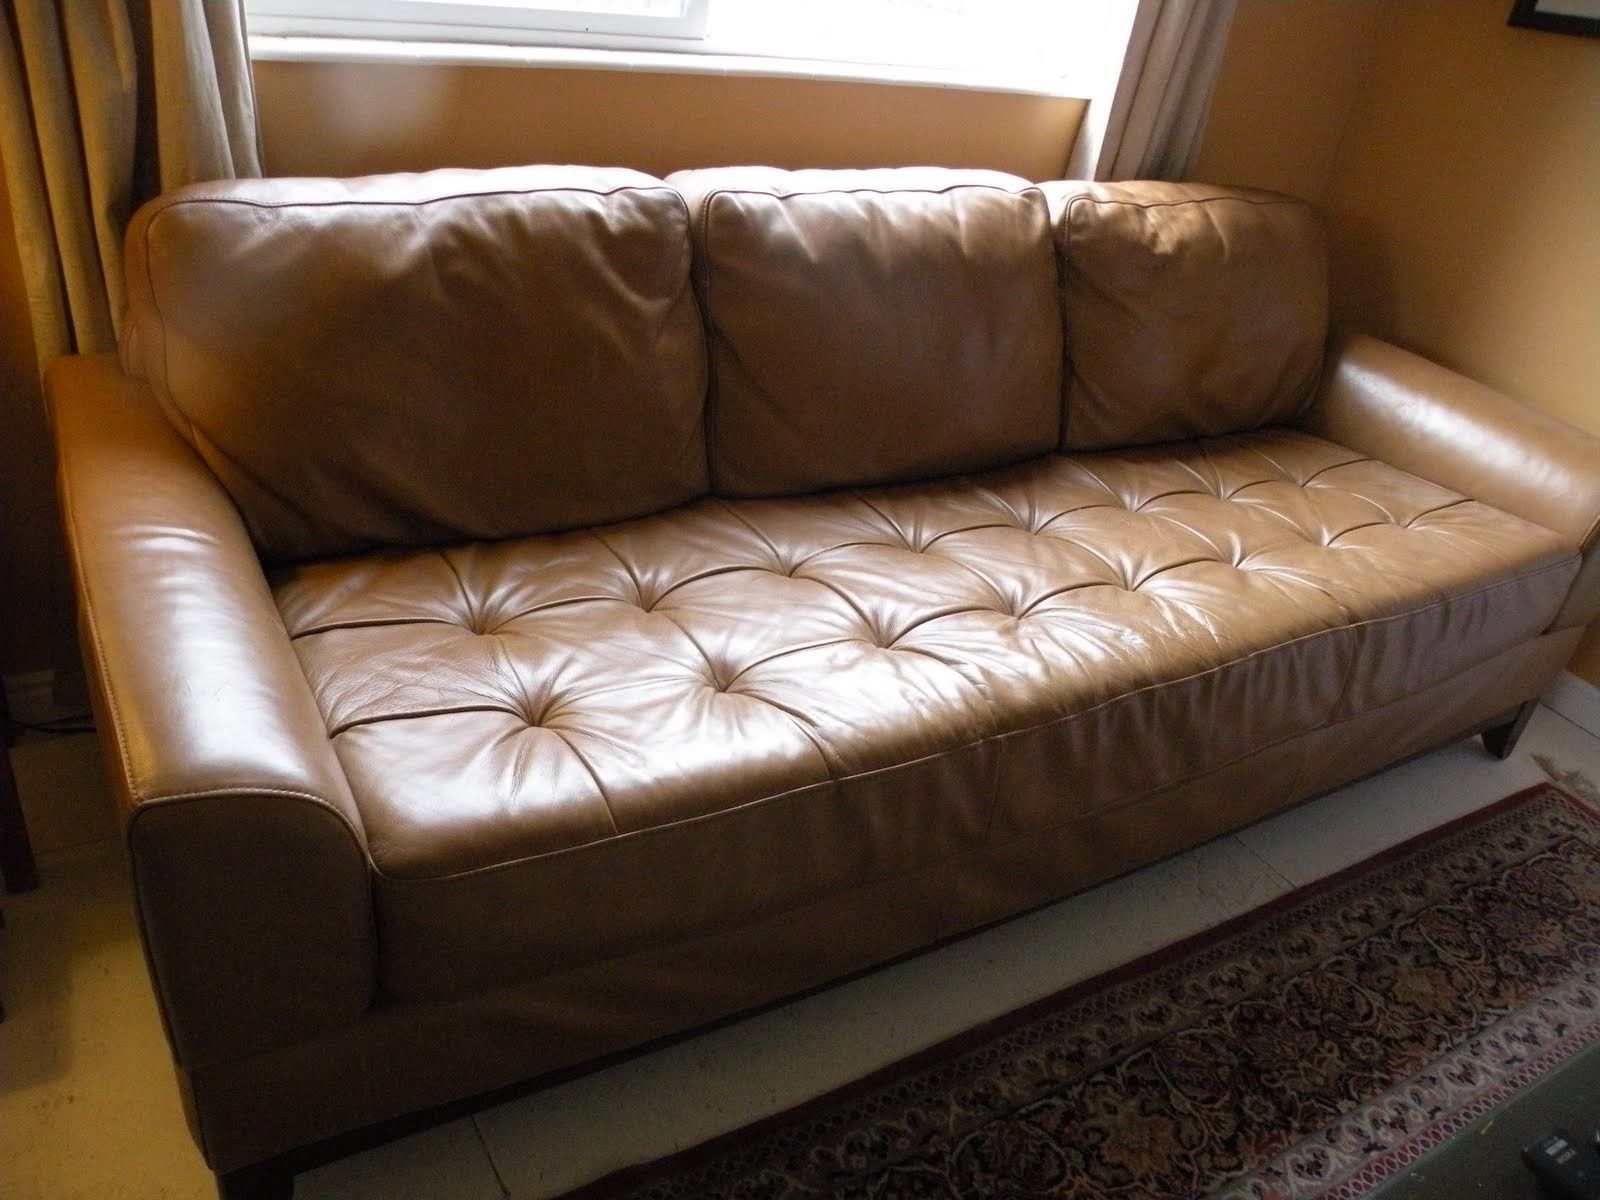 Used Sectional Sofas With Regard To 2018 Sectional Sofa Design: Recomendation Used Sectional Sofa For Sale (View 17 of 20)